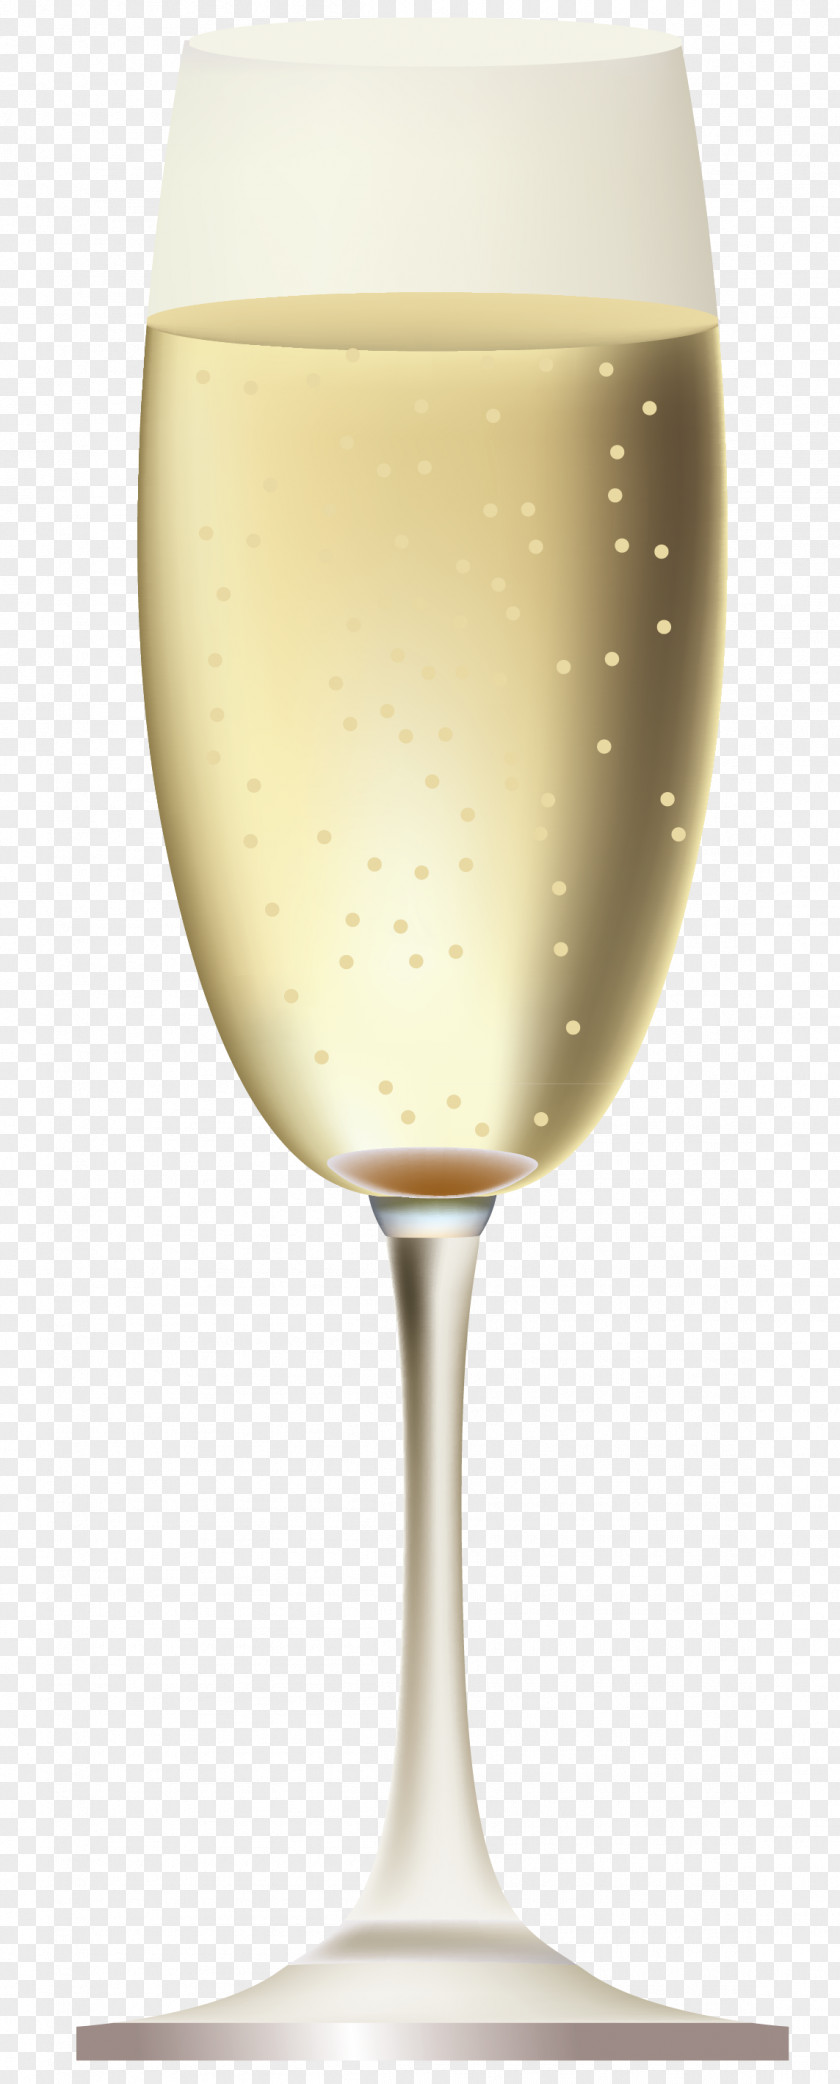 Champagne Glass Picture Cocktail Sparkling Wine Soft Drink PNG